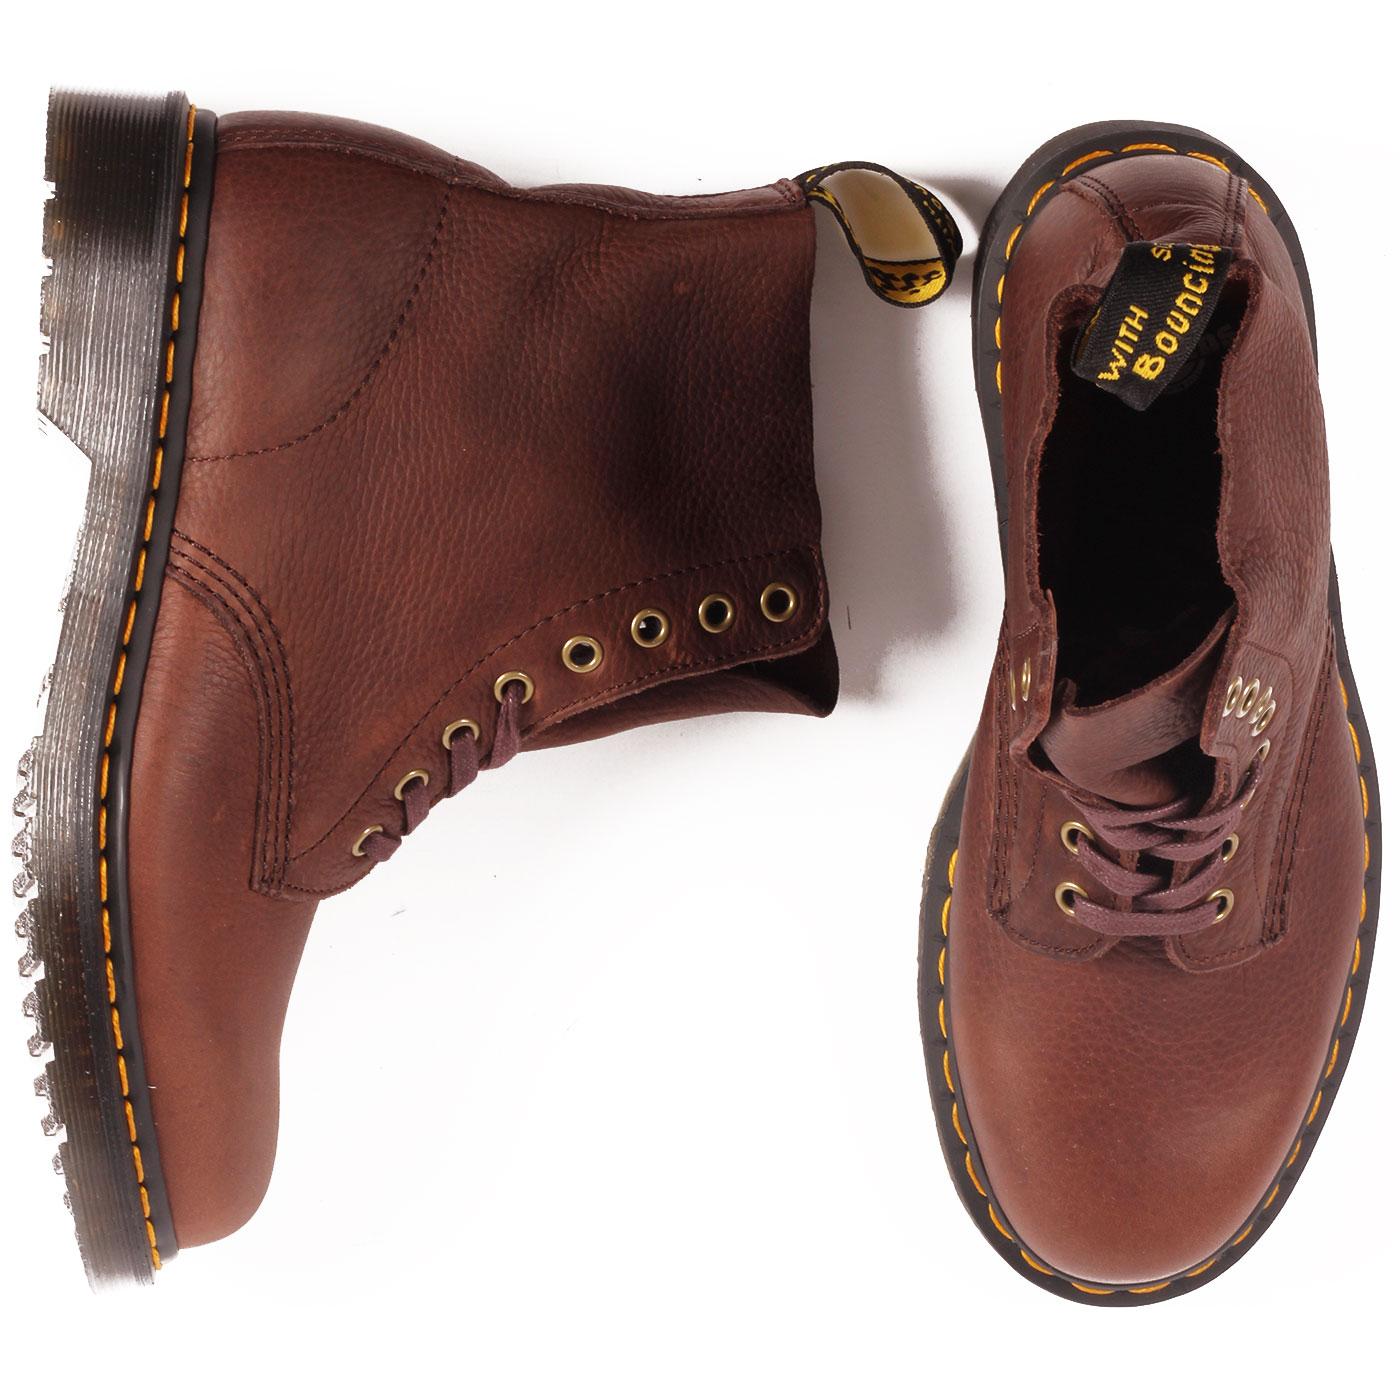 Buy > dr martens 1460 pascal review > in stock